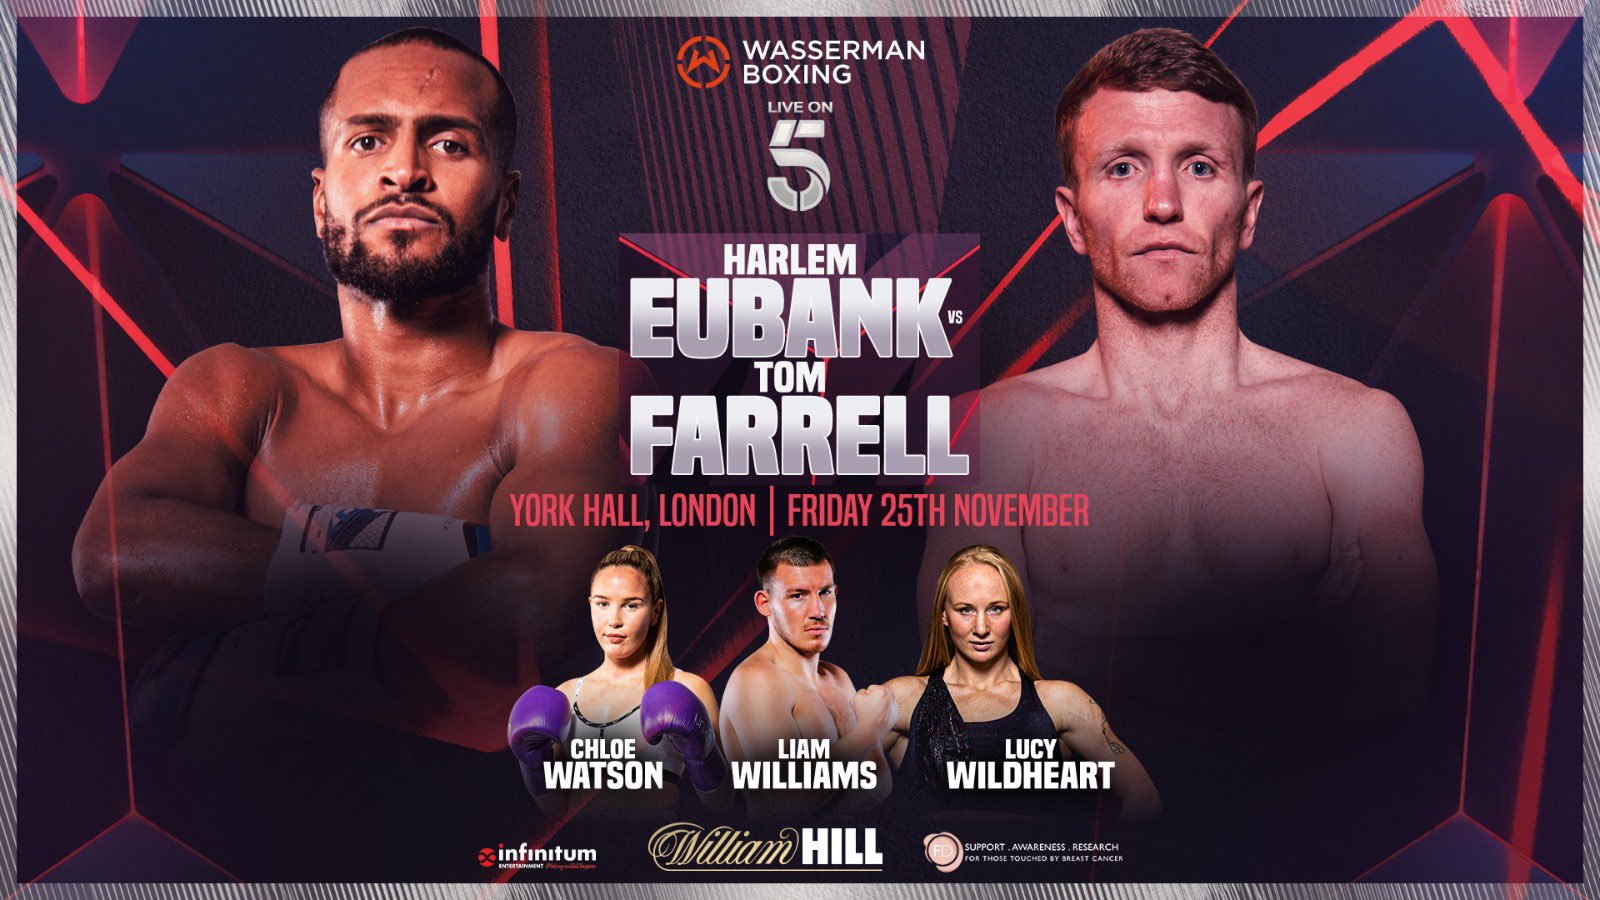 Preview Liam Williams and Harlem Eubank return at York Hall